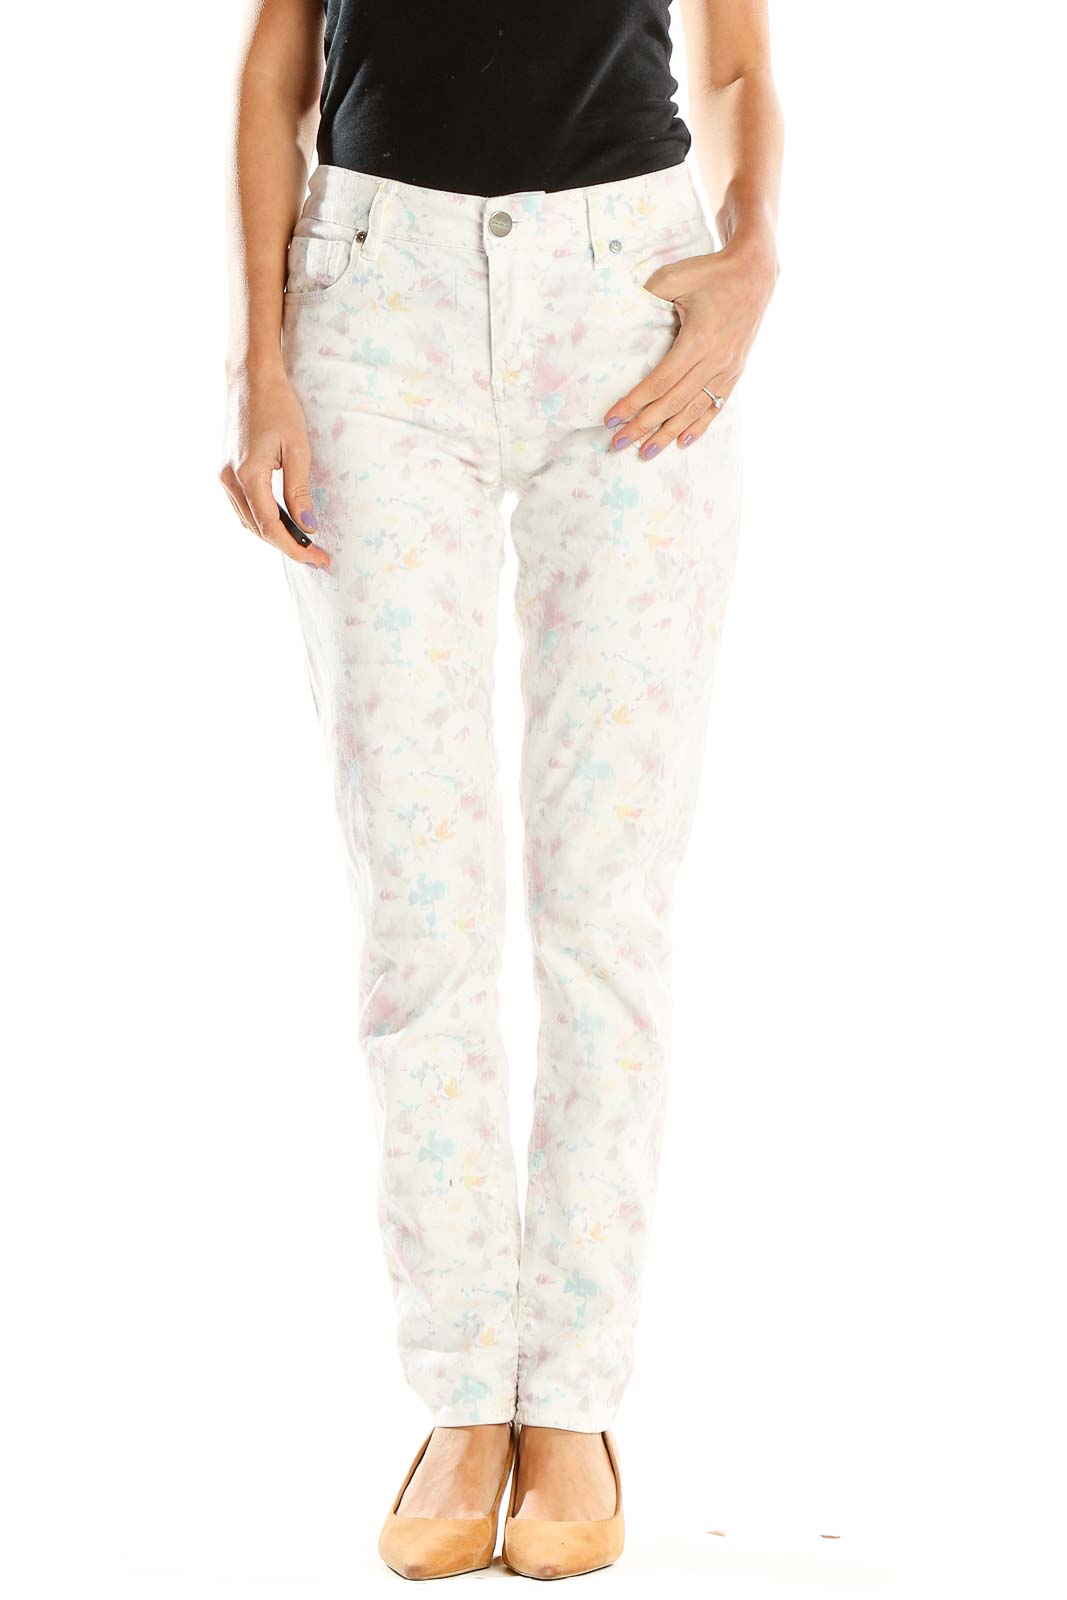 White Pastel Printed Jeans Front